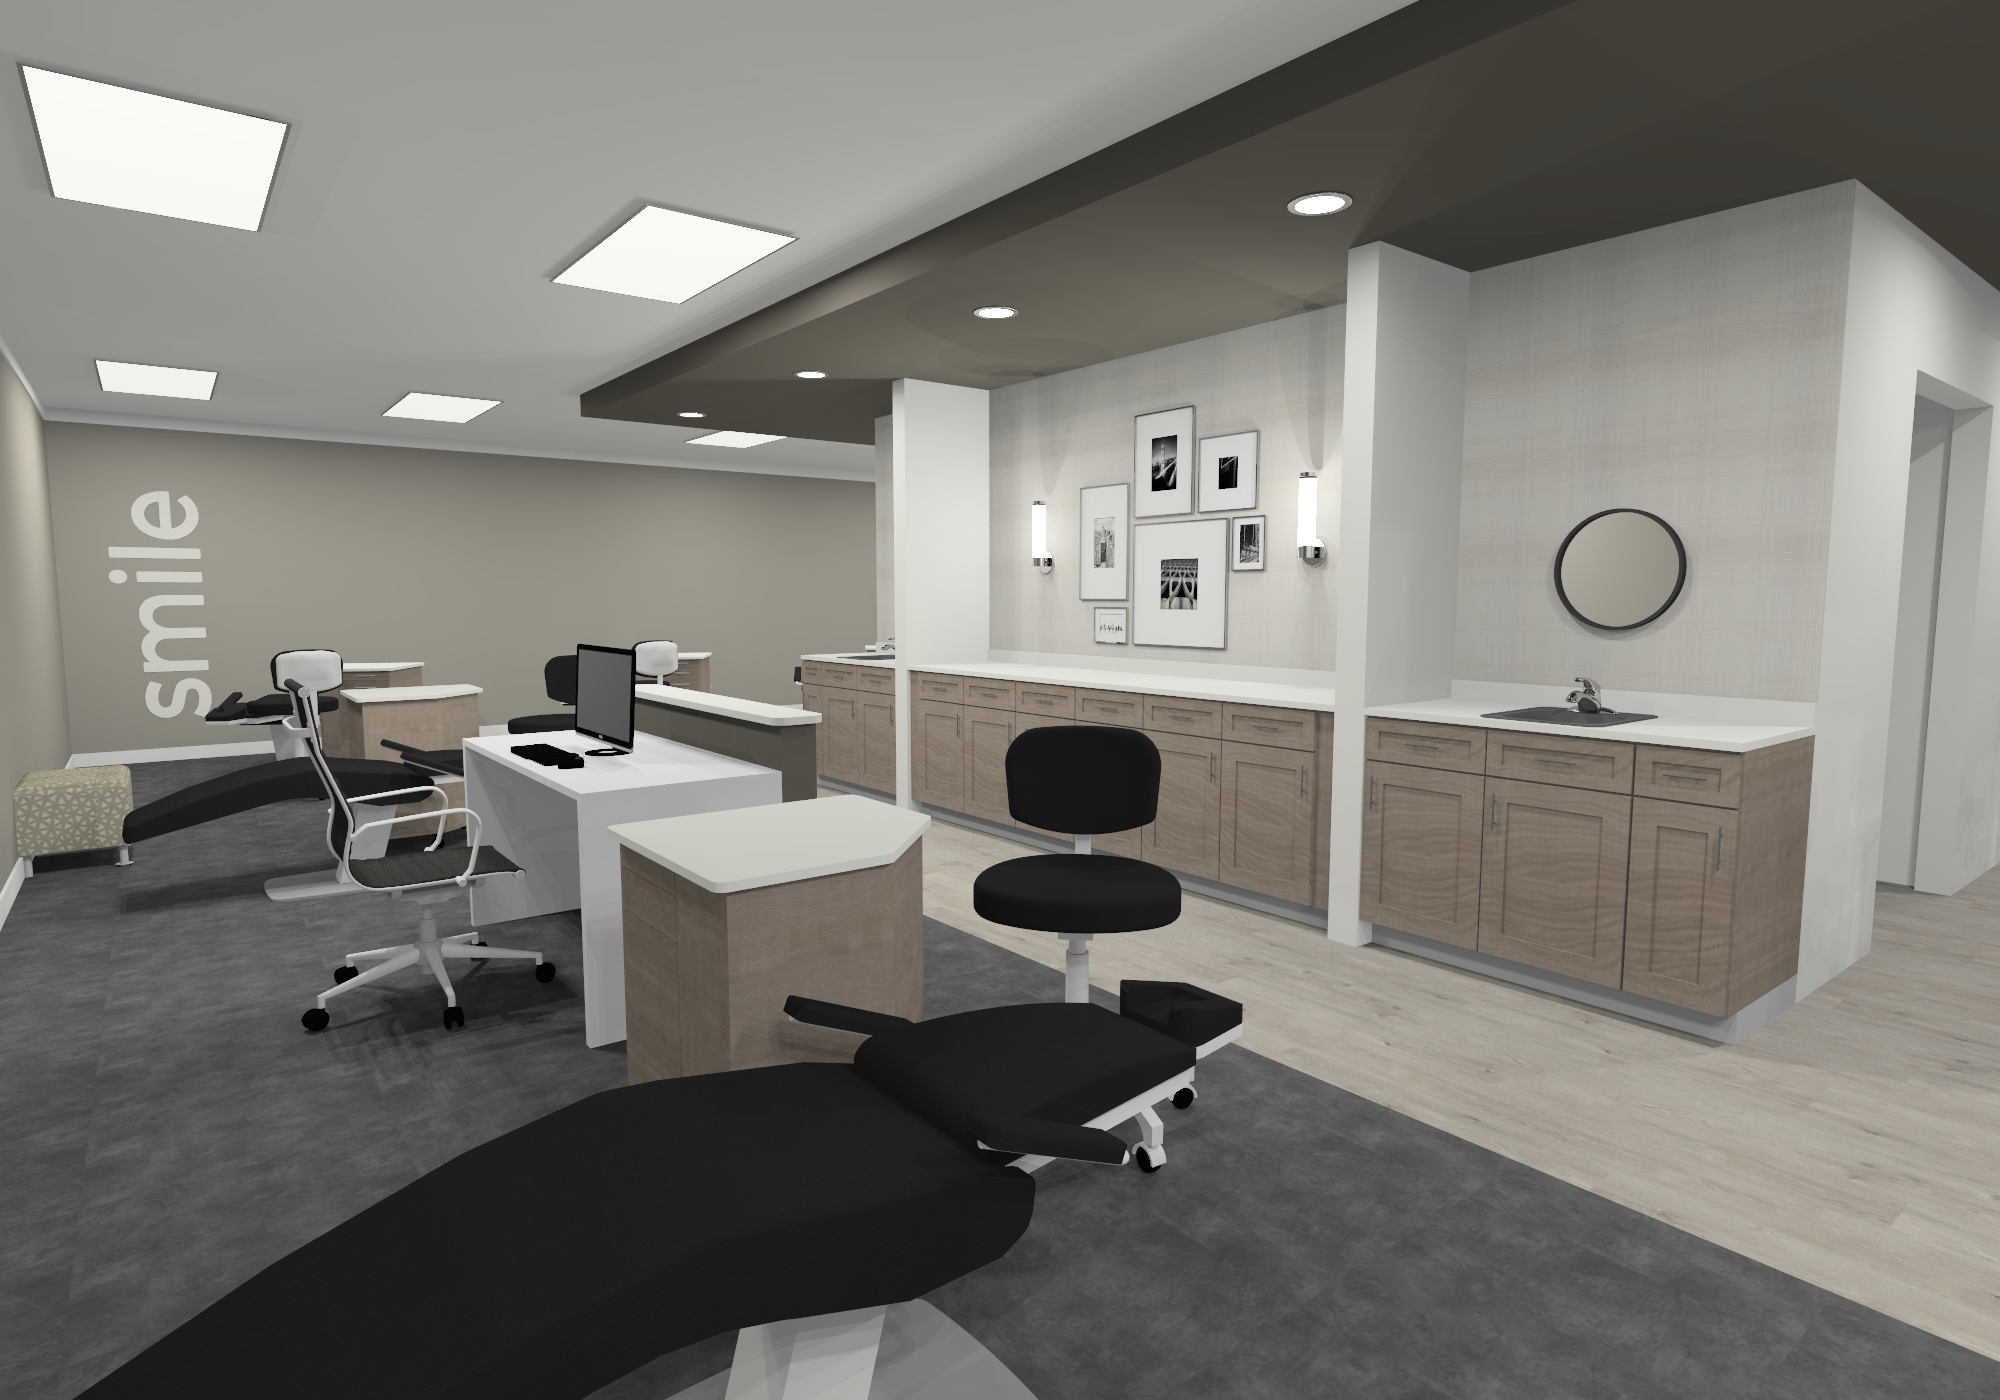 Environmental rendering of the orthodontic treatment bay.